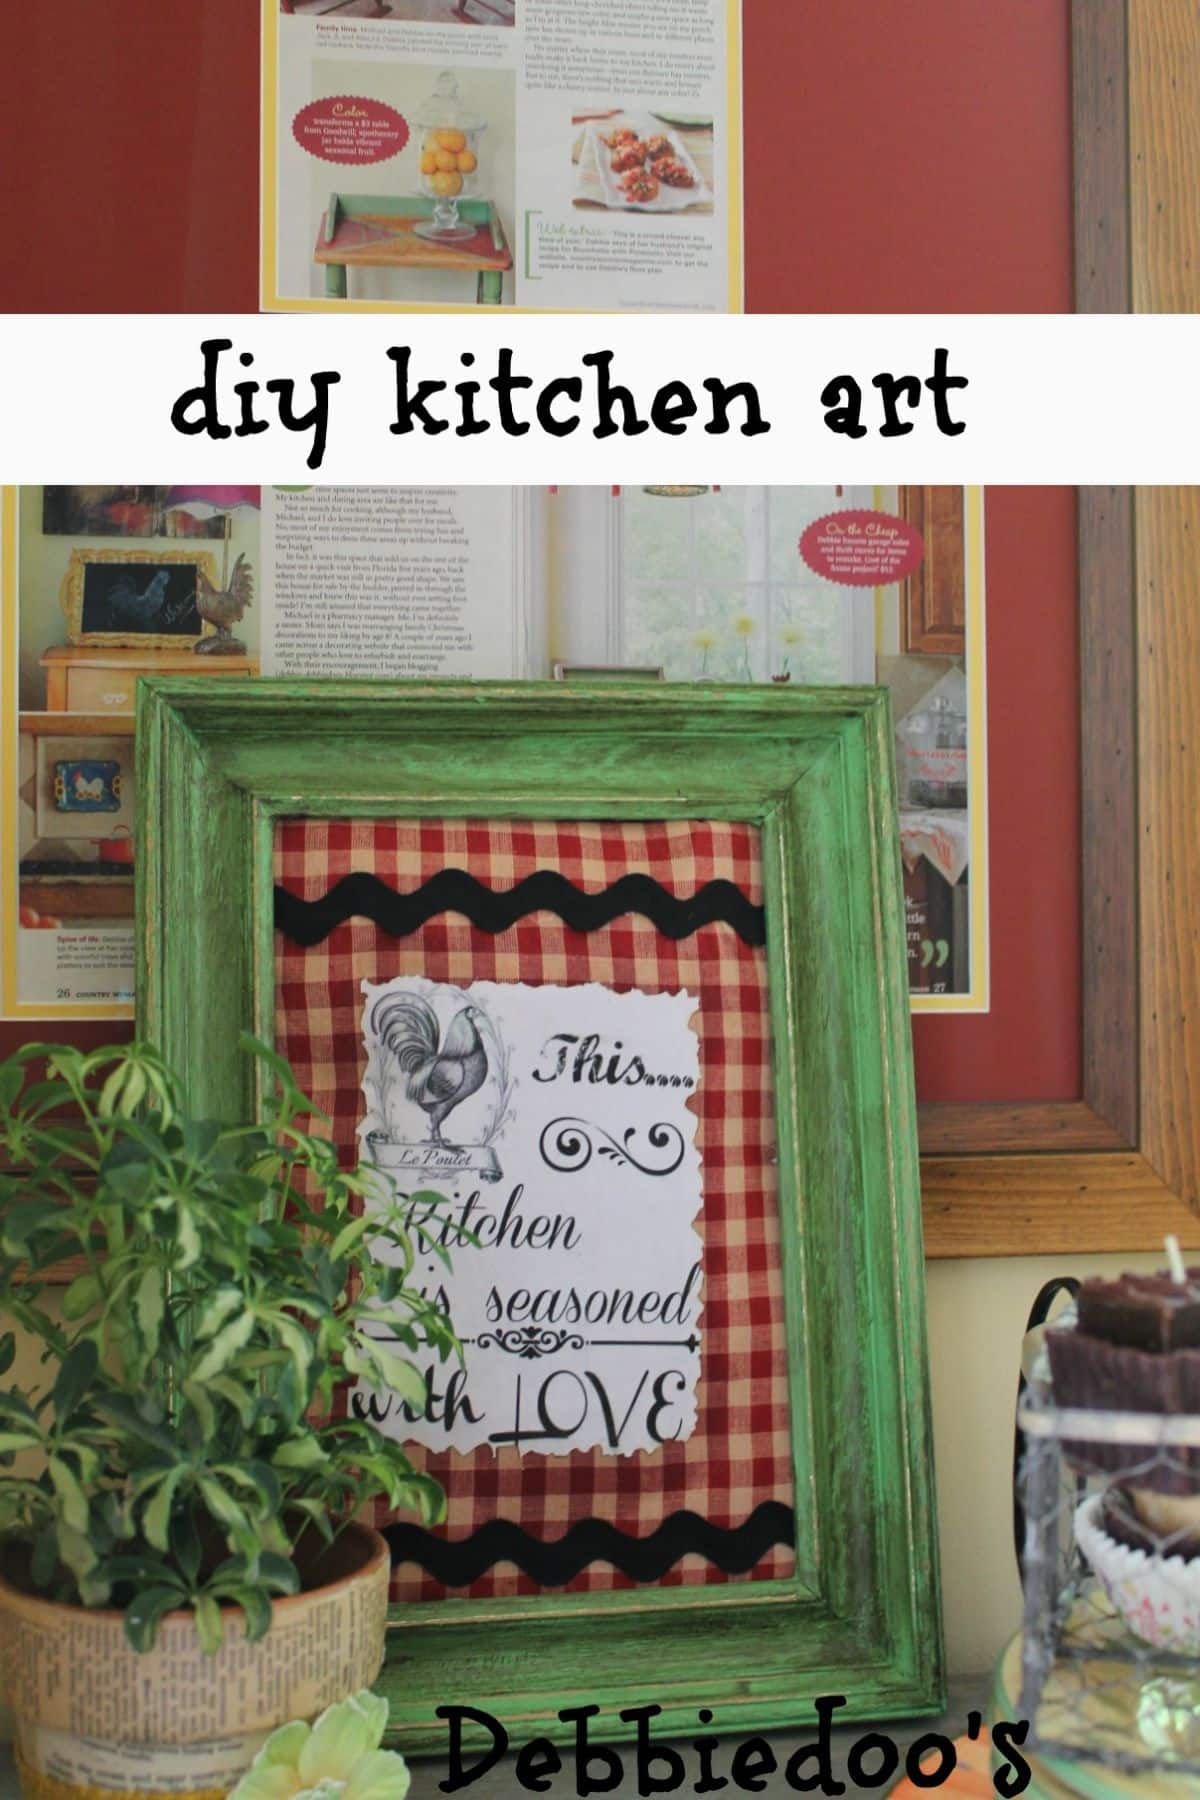 DIY Kitchen Art with Fabric Scraps and a Printable